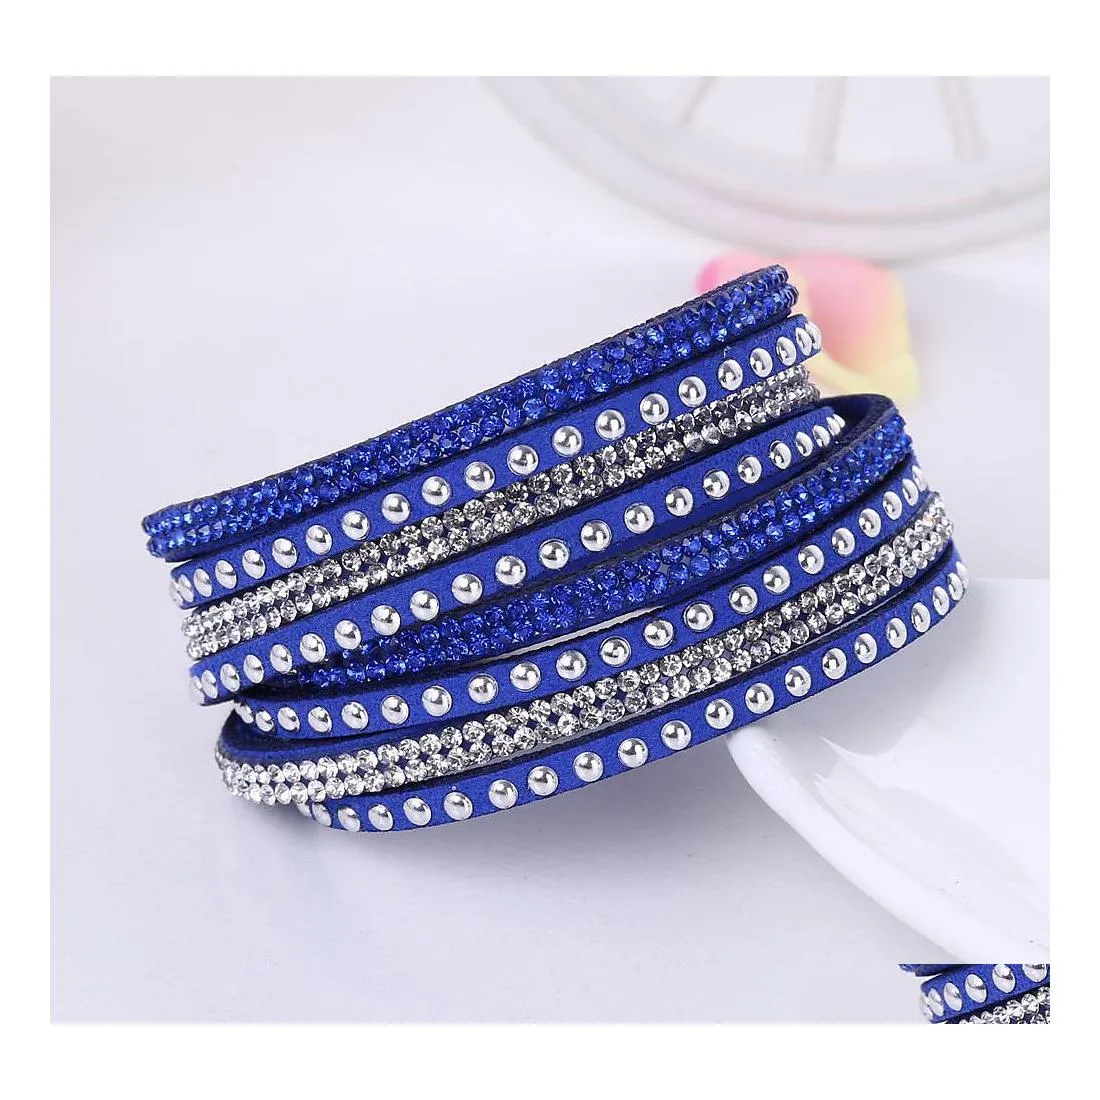 Link Chain Fashion Long Leather Bangle Bracelet Handmade Mticolor Charms Diamond Necklace For Women Trendy Jewelry Gift Y Drop Deli Dhaef